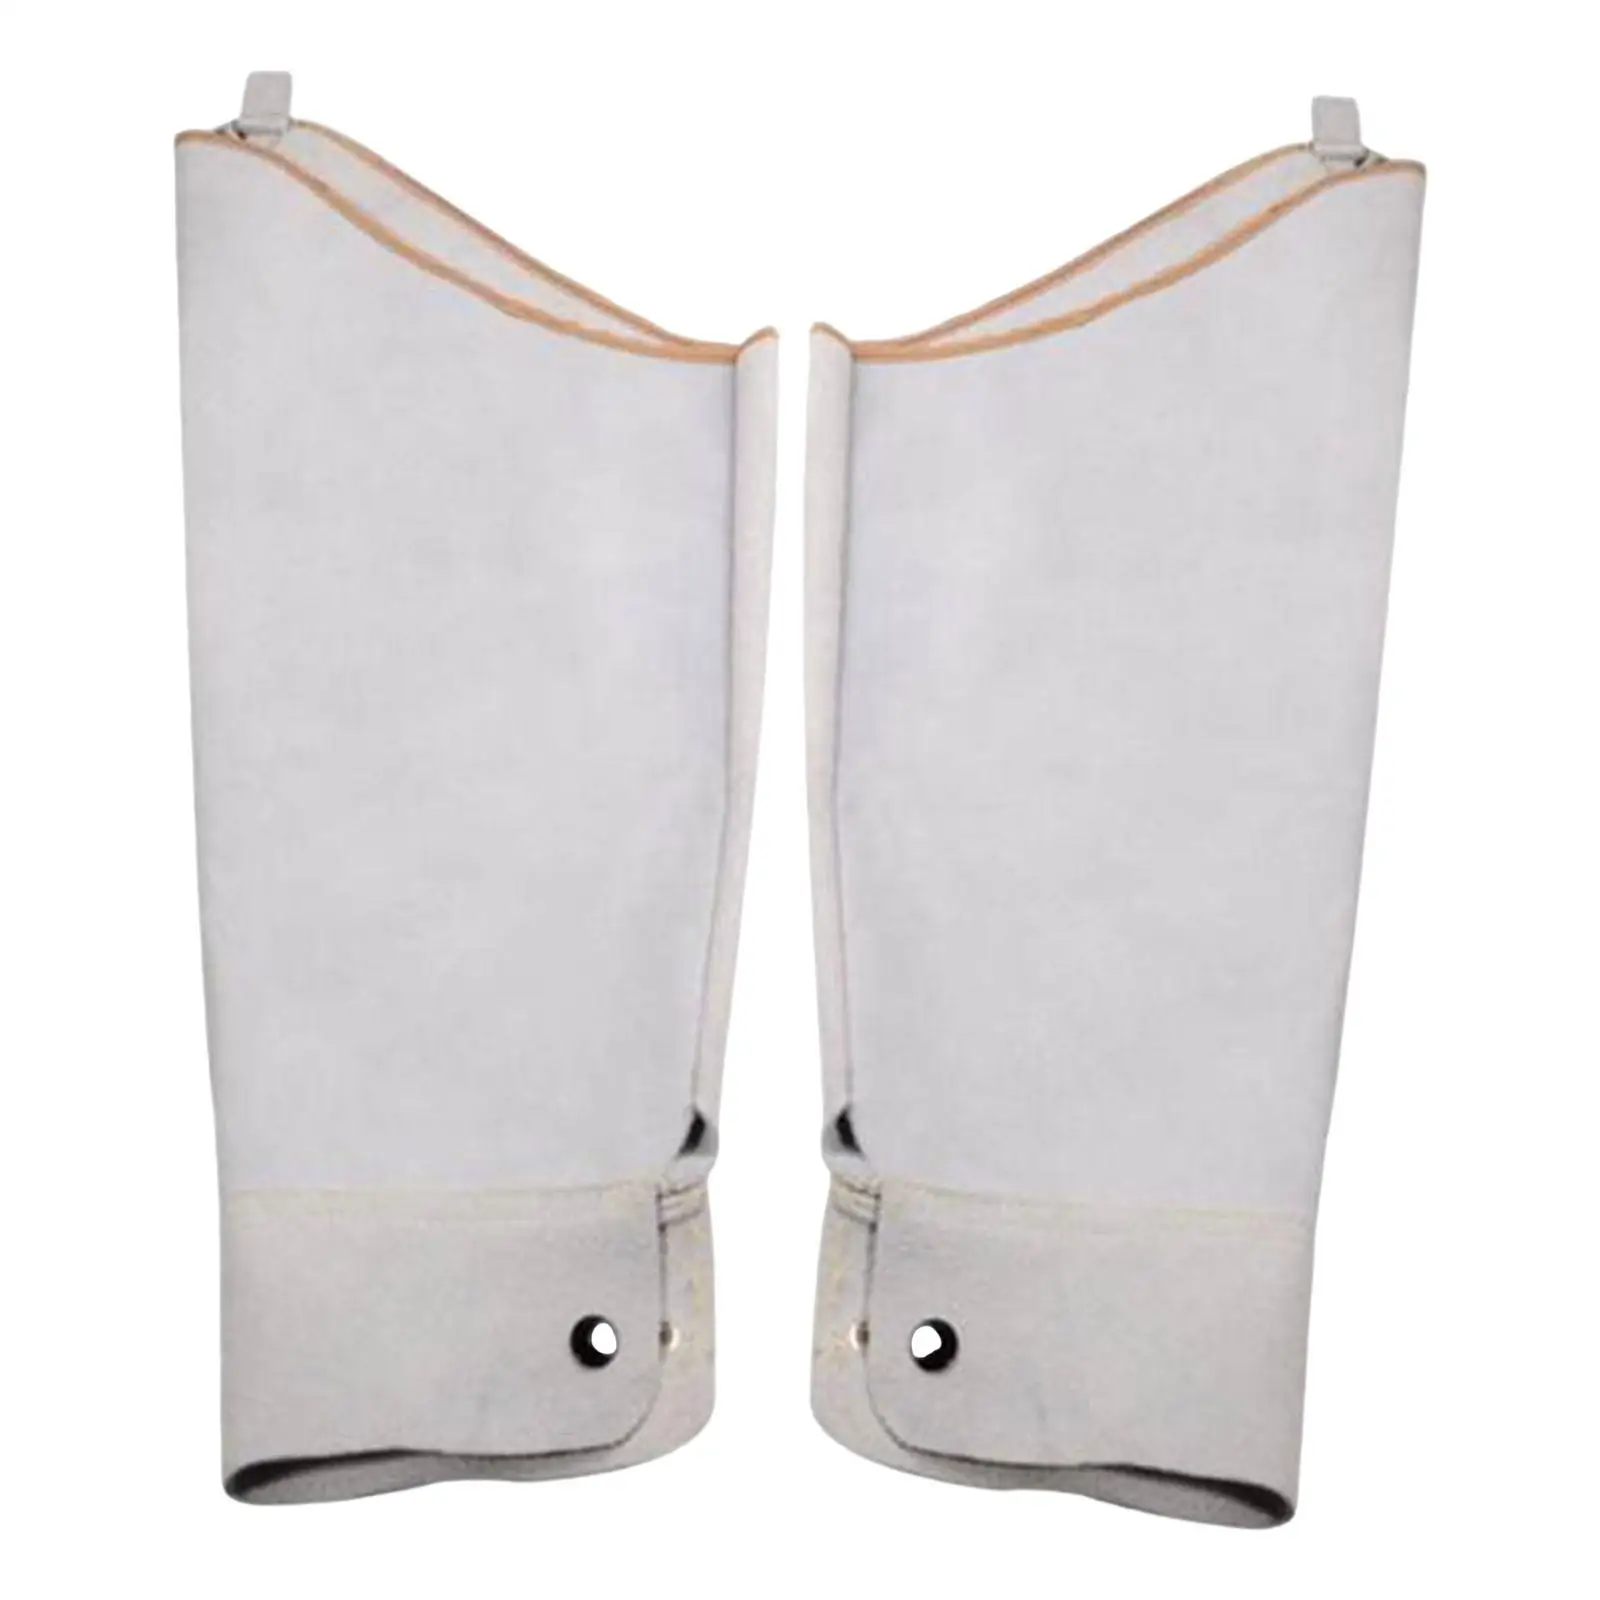 60cm Long Welding Sleeves Heat Resistant Protective Sleeves Arm Protection